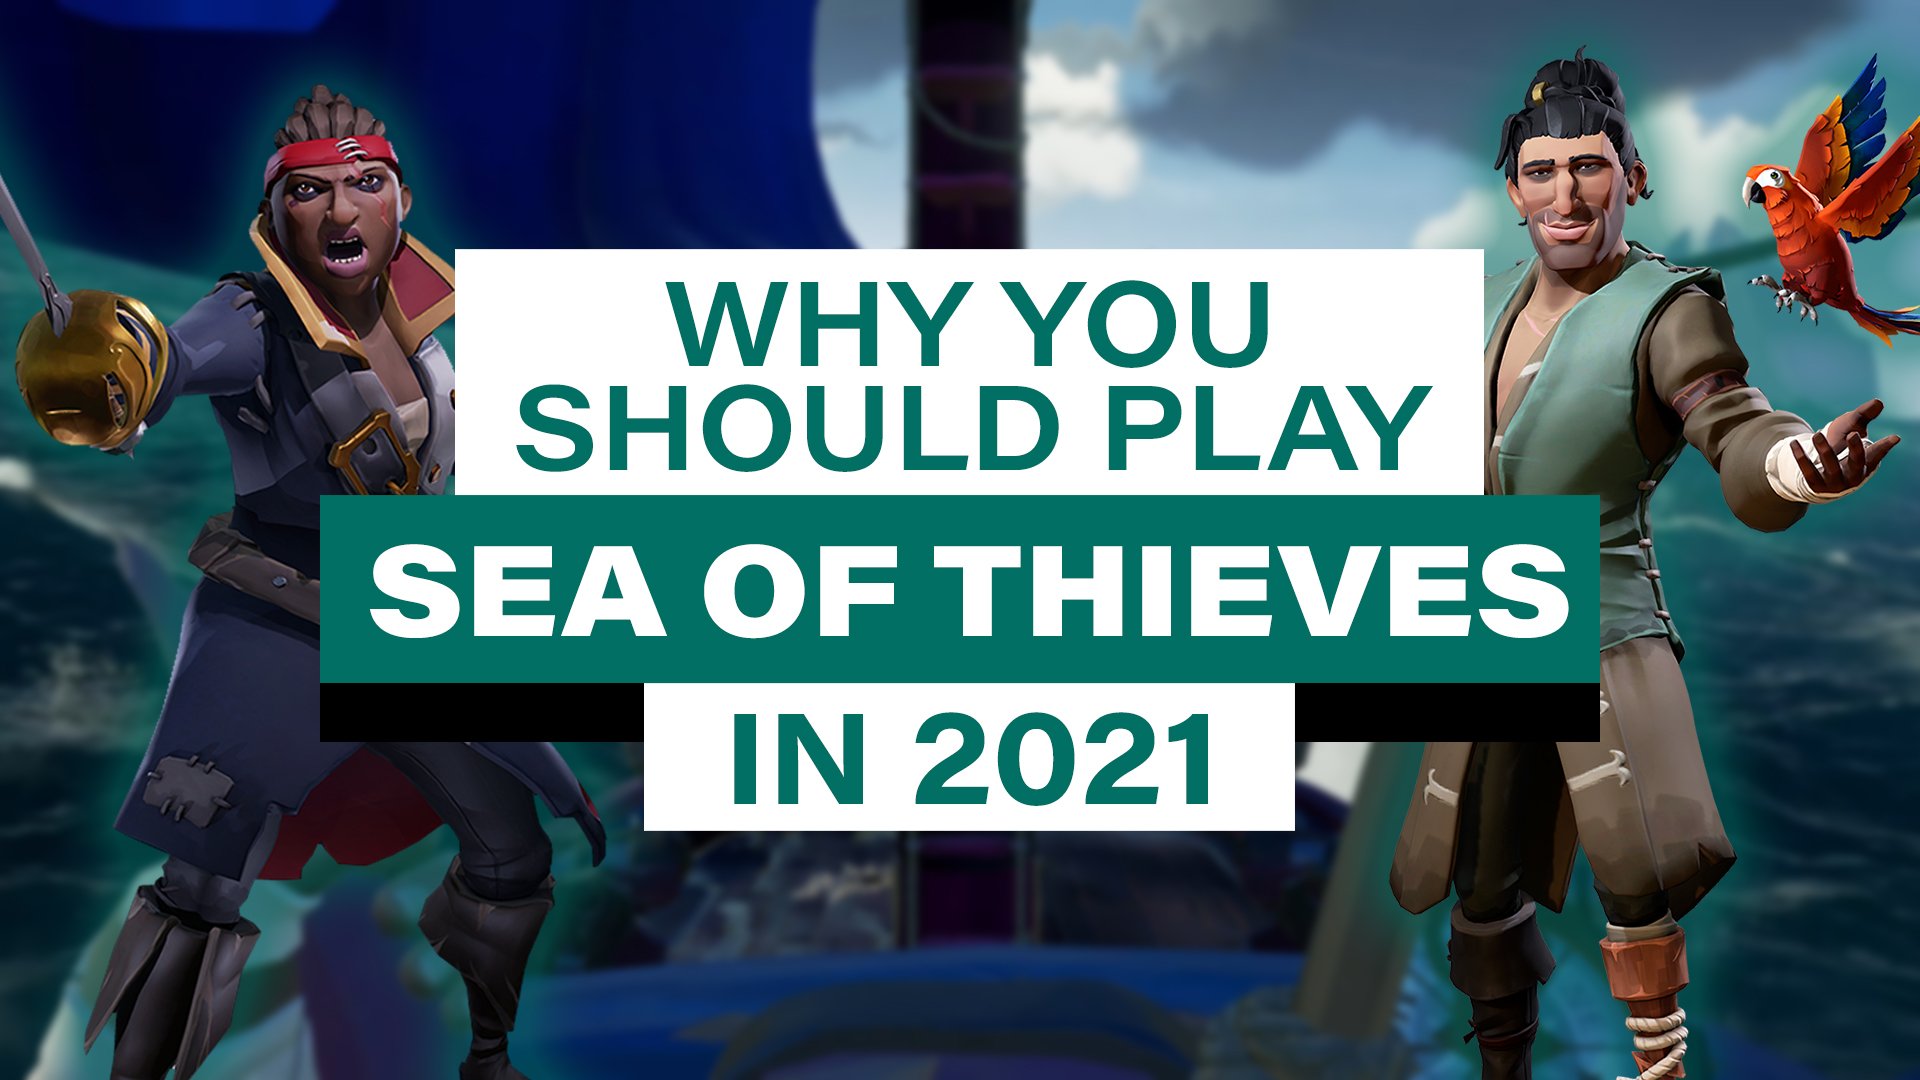 Why you should play Sea of Thieves in 2021